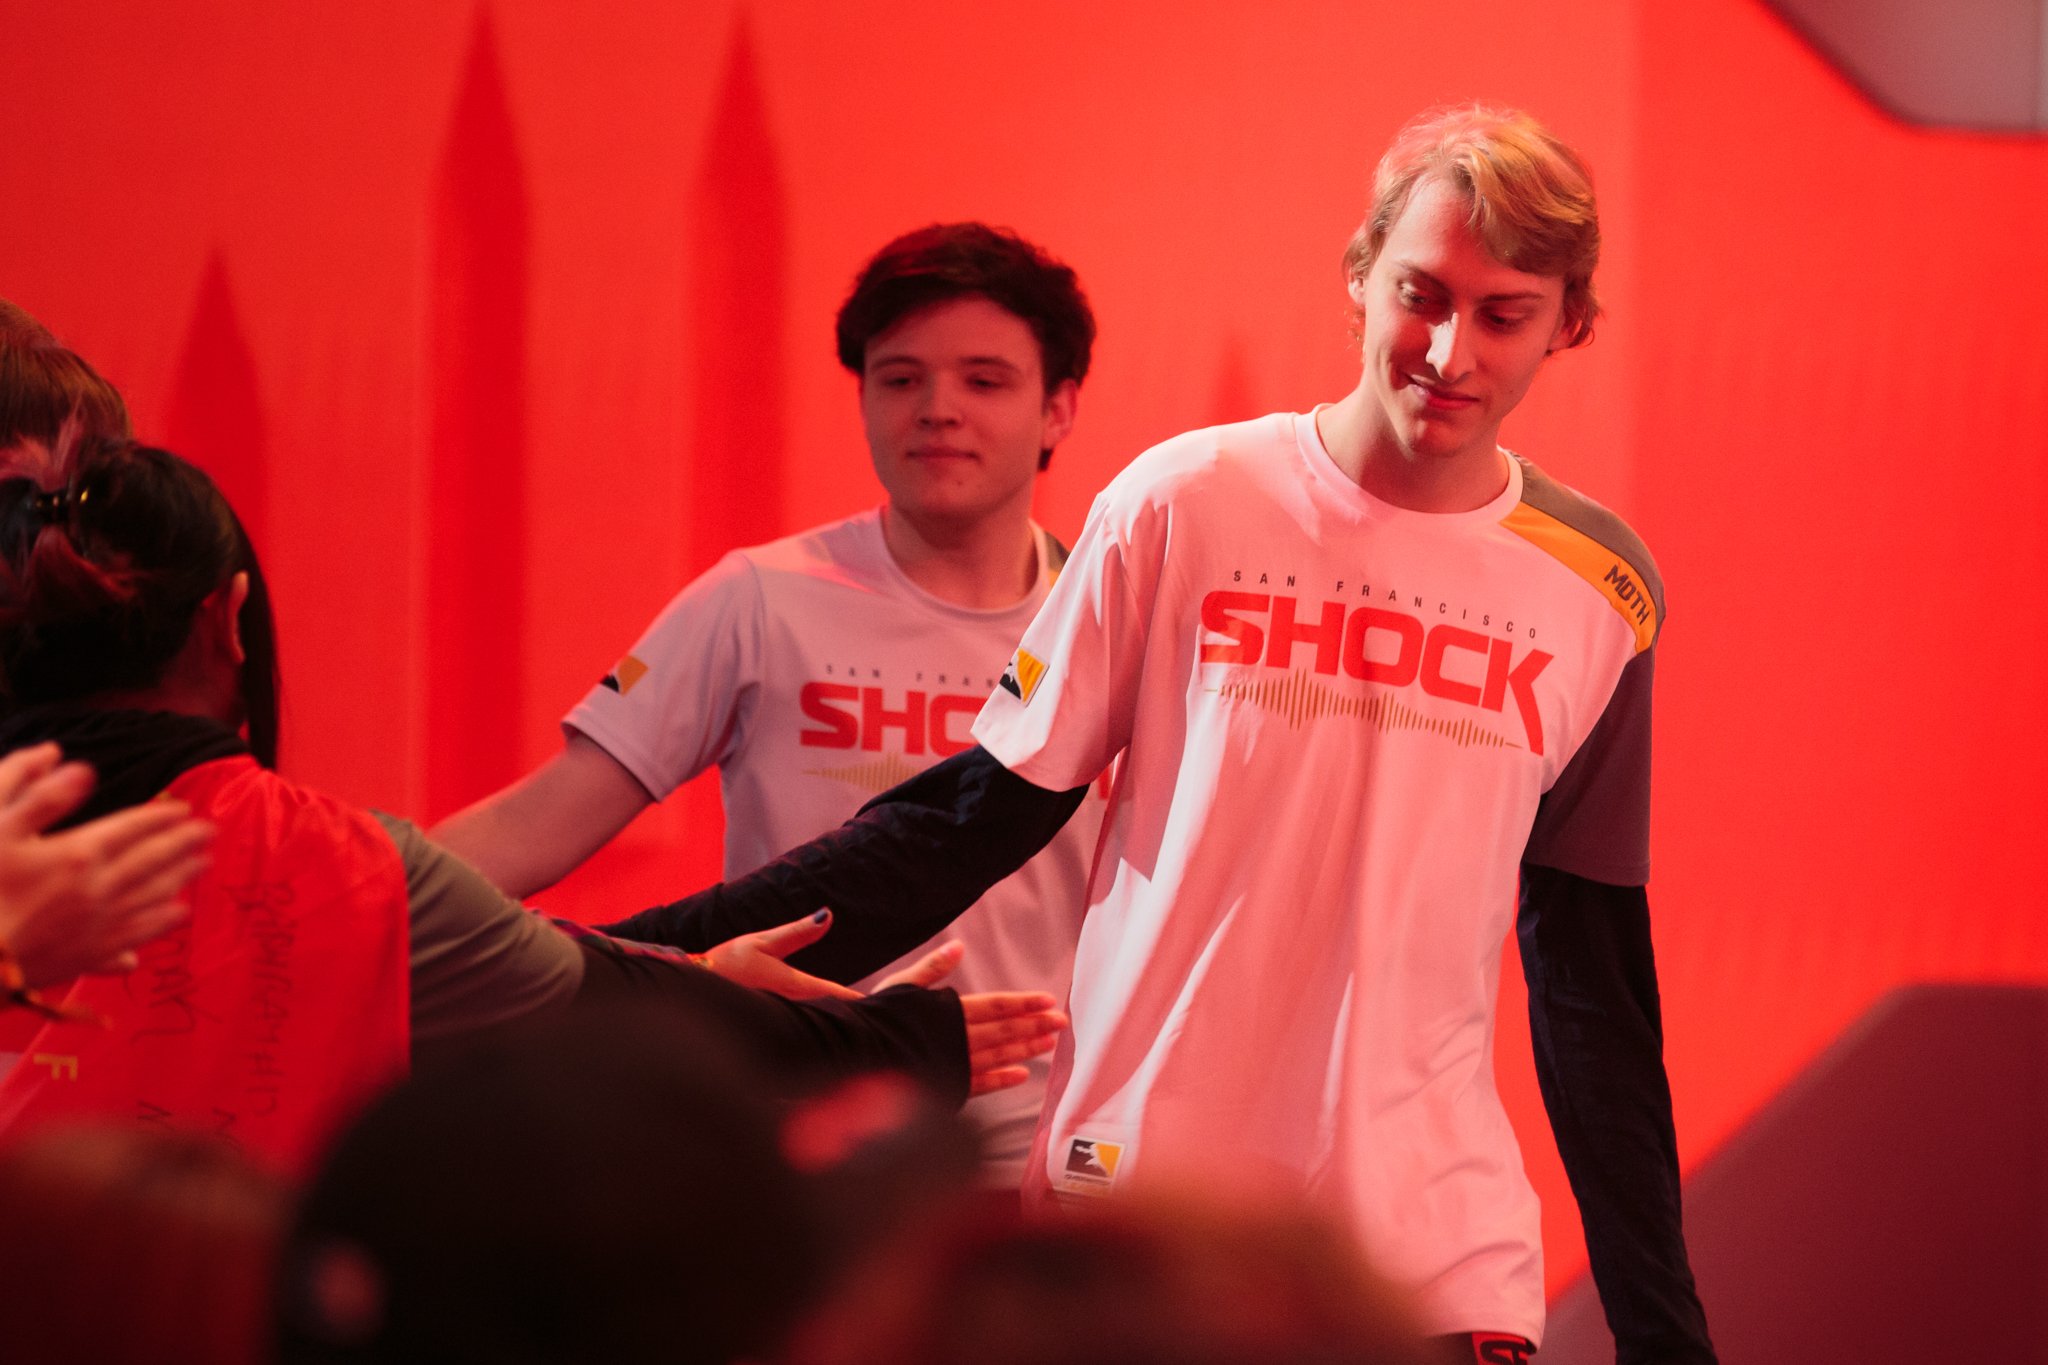 Arab insekt Decrement Europe is a "key market" for Overwatch League expansion, says commissioner  - Dot Esports